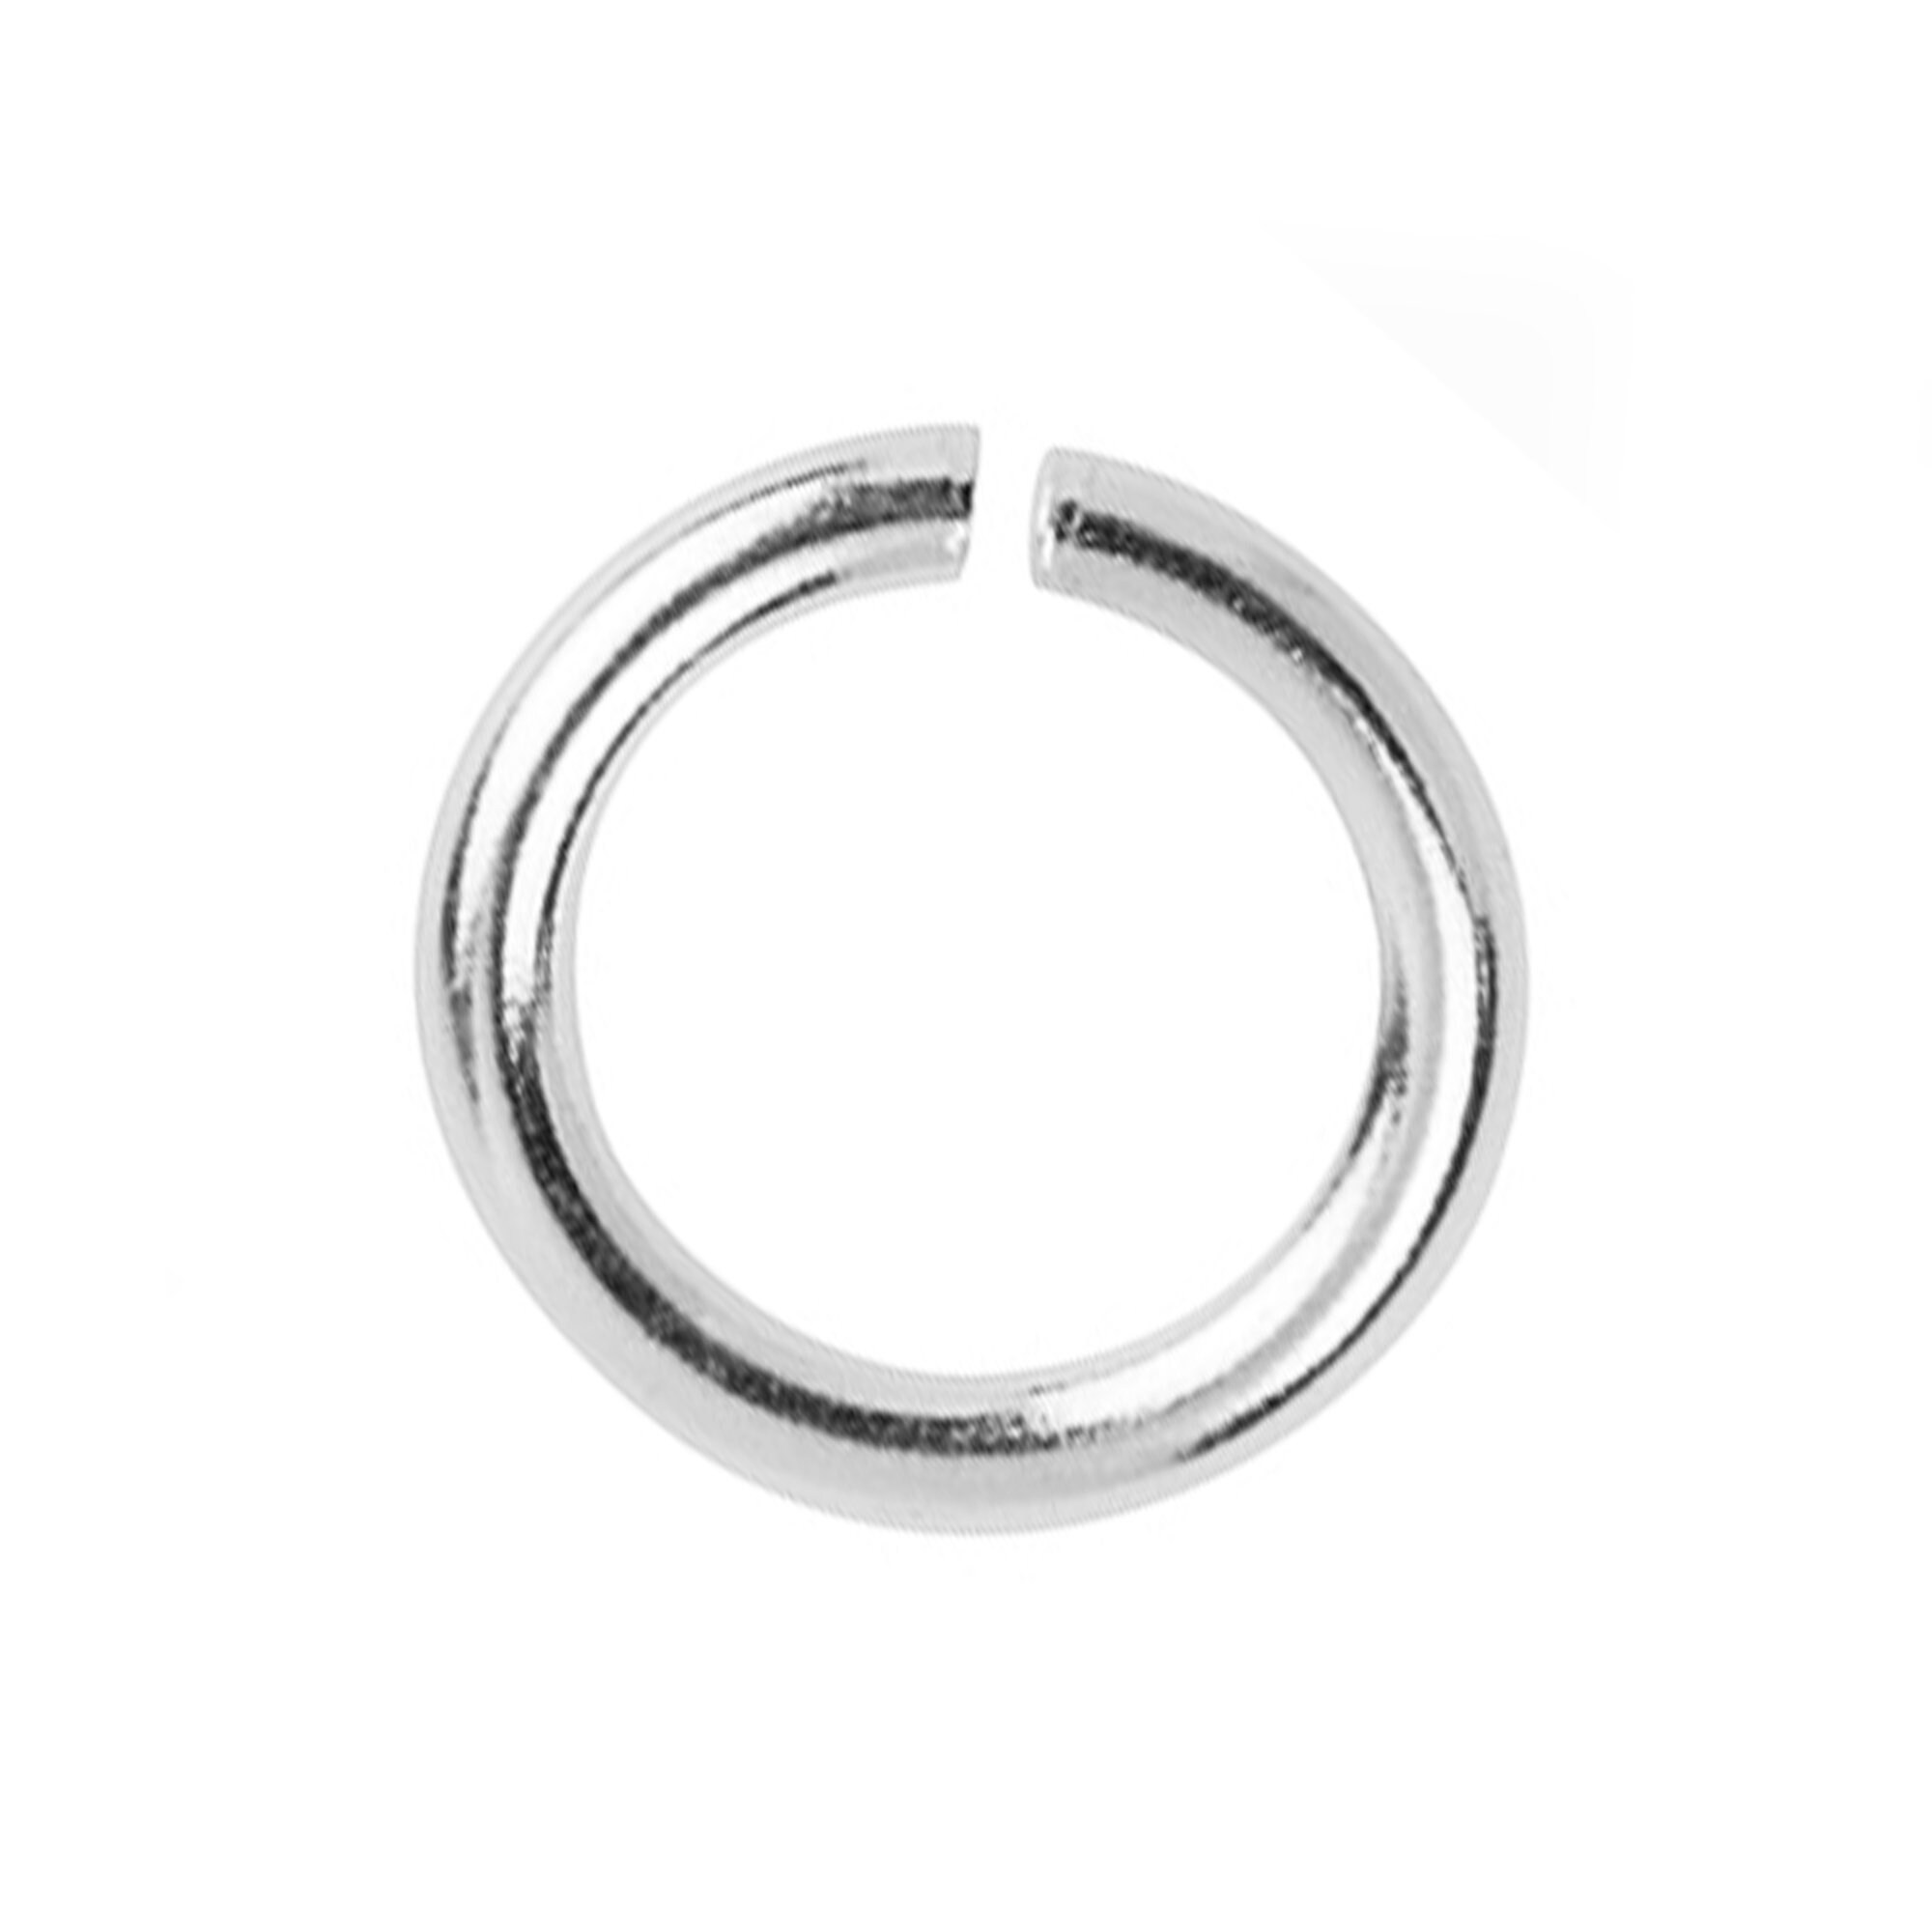 Gold Stainless Jump Rings, 5x1mm, 3.0mm Inside Diameter, 18 gauge, Clo -  Jewelry Tool Box